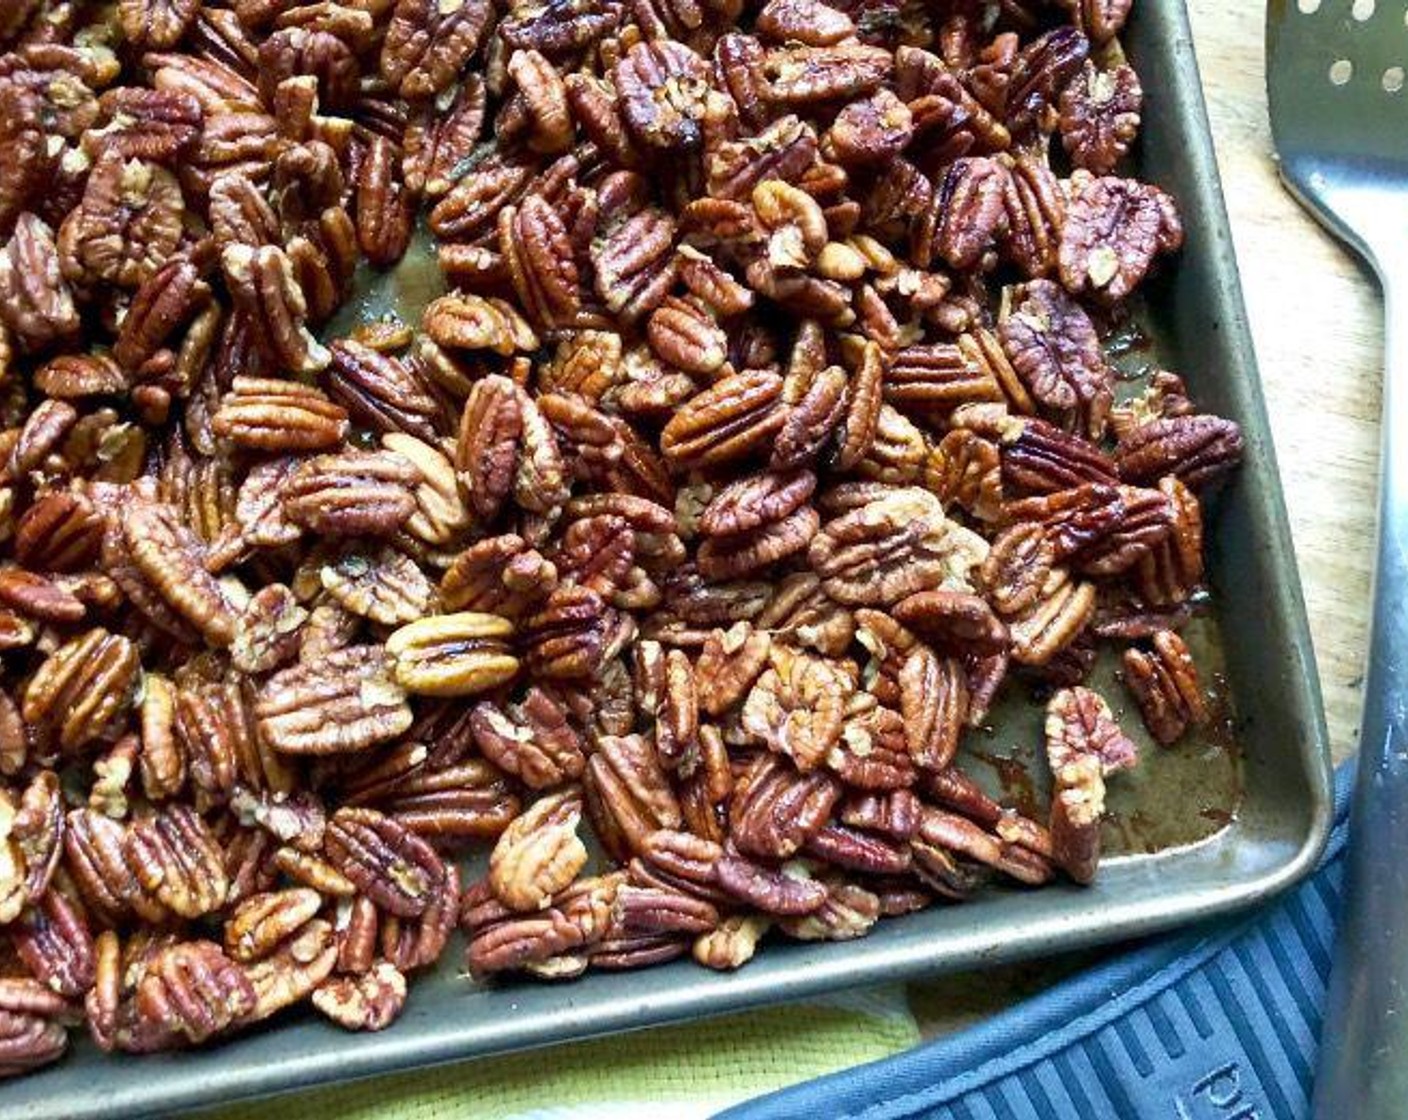 step 5 Spread the pecans in a single layer. Roast for 25 minutes, stirring twice with a large metal spatula until the nuts are glazed and golden brown.